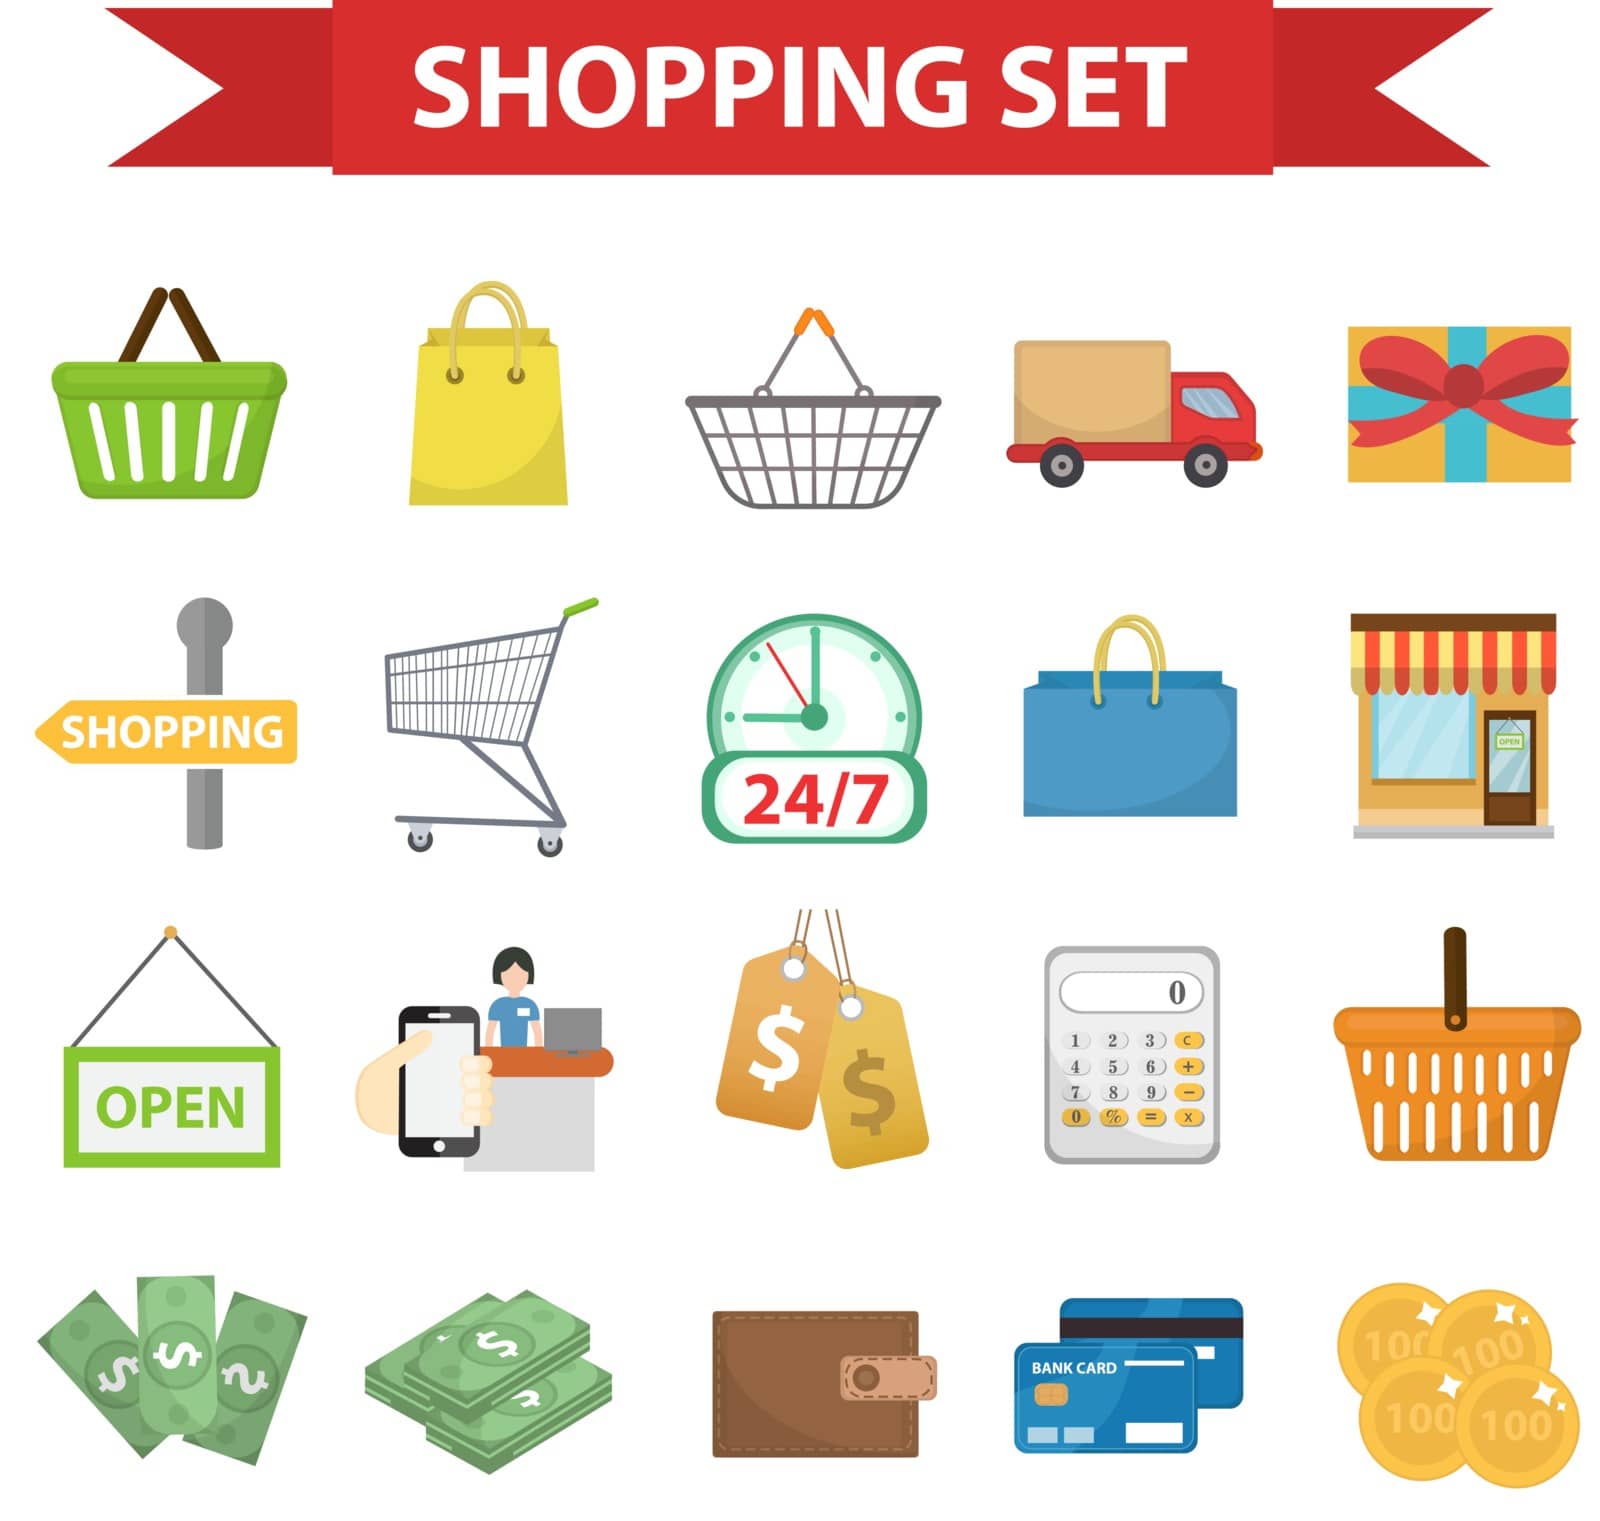 Shopping icon set, flat style. Shop icons collection isolated on white background. Store objects and items. Vector illustration, clip-art